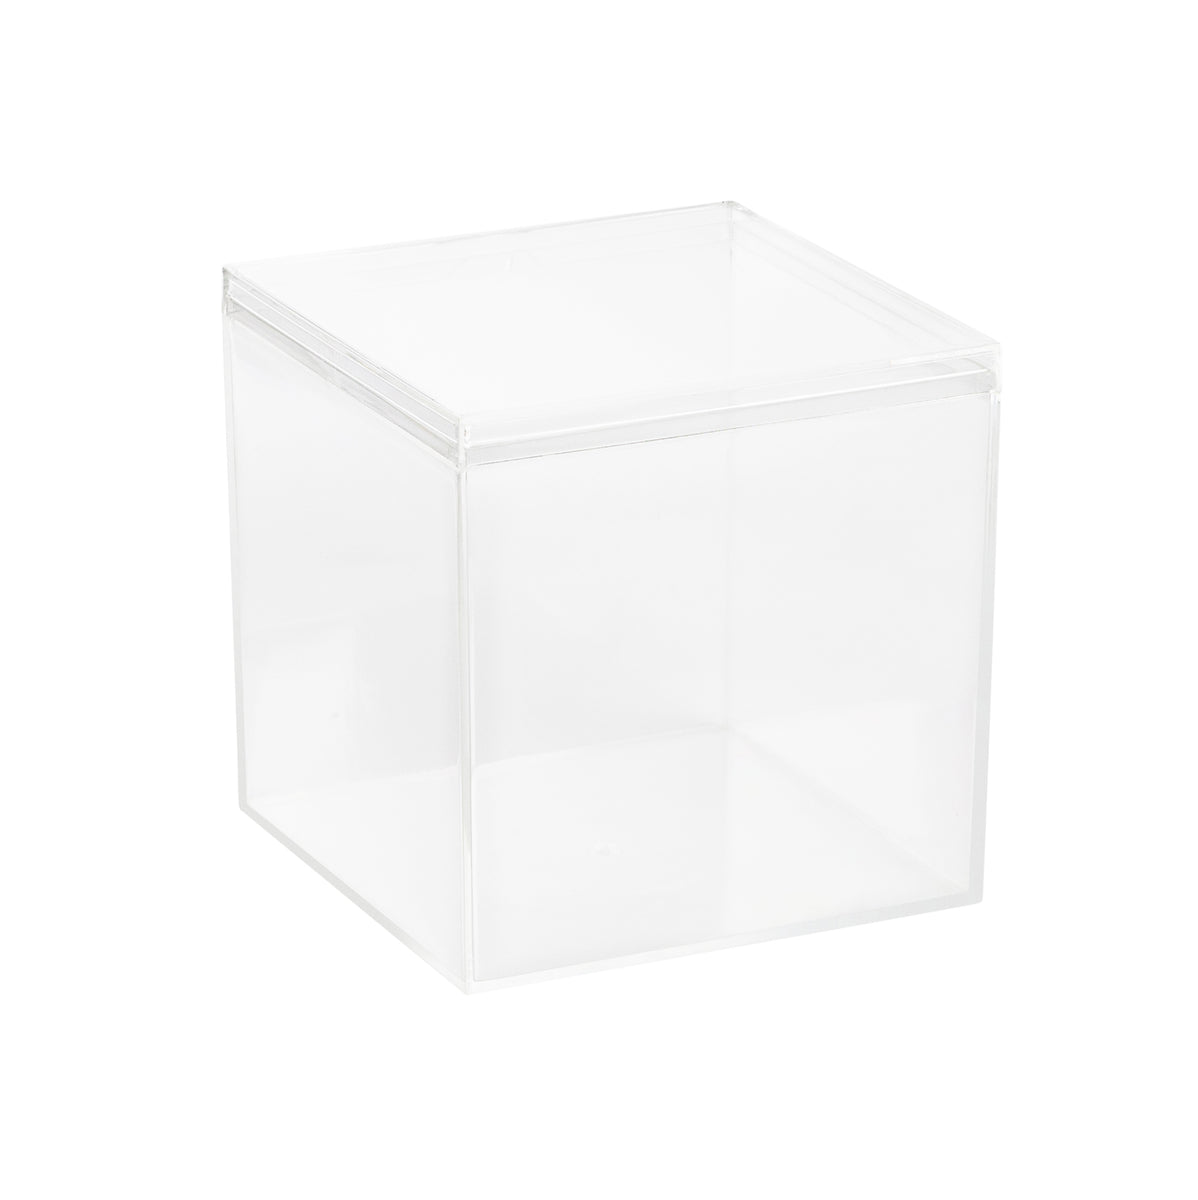 Hammont Clear Acrylic Boxes Round 12 Pack 2.75x3.75